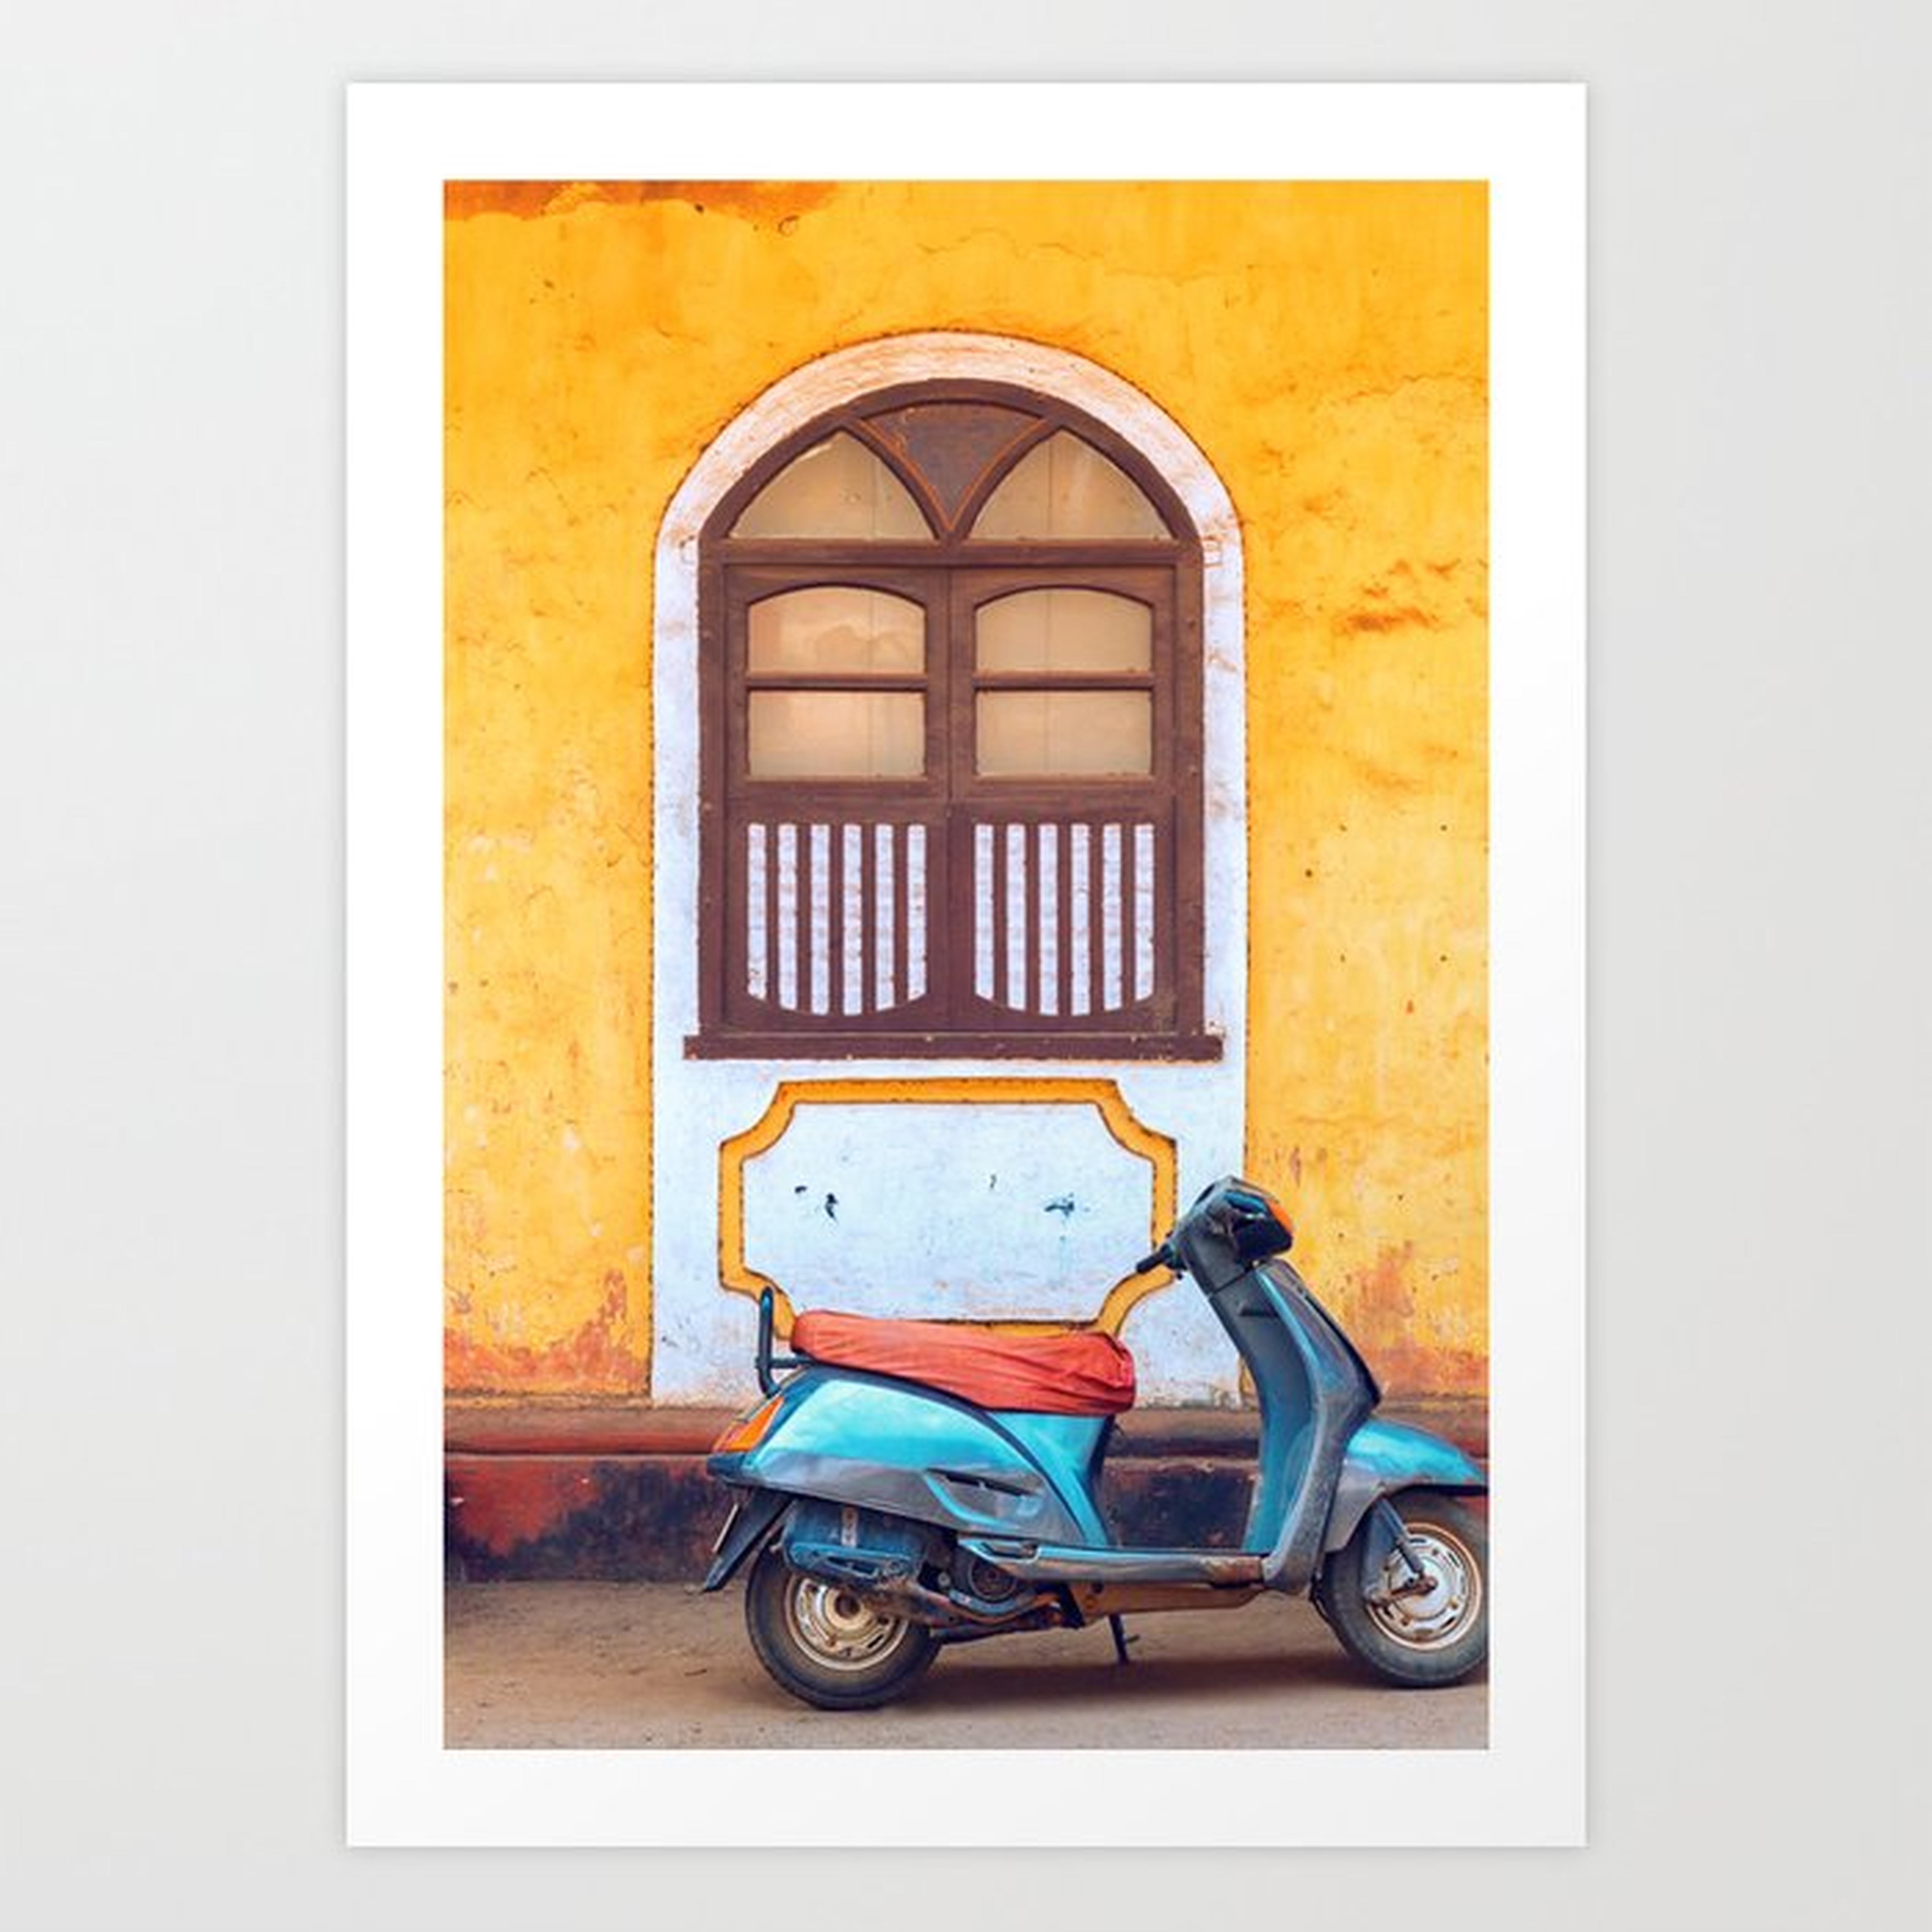 Travel photography made in India. Art Print 13"x19" - Society6